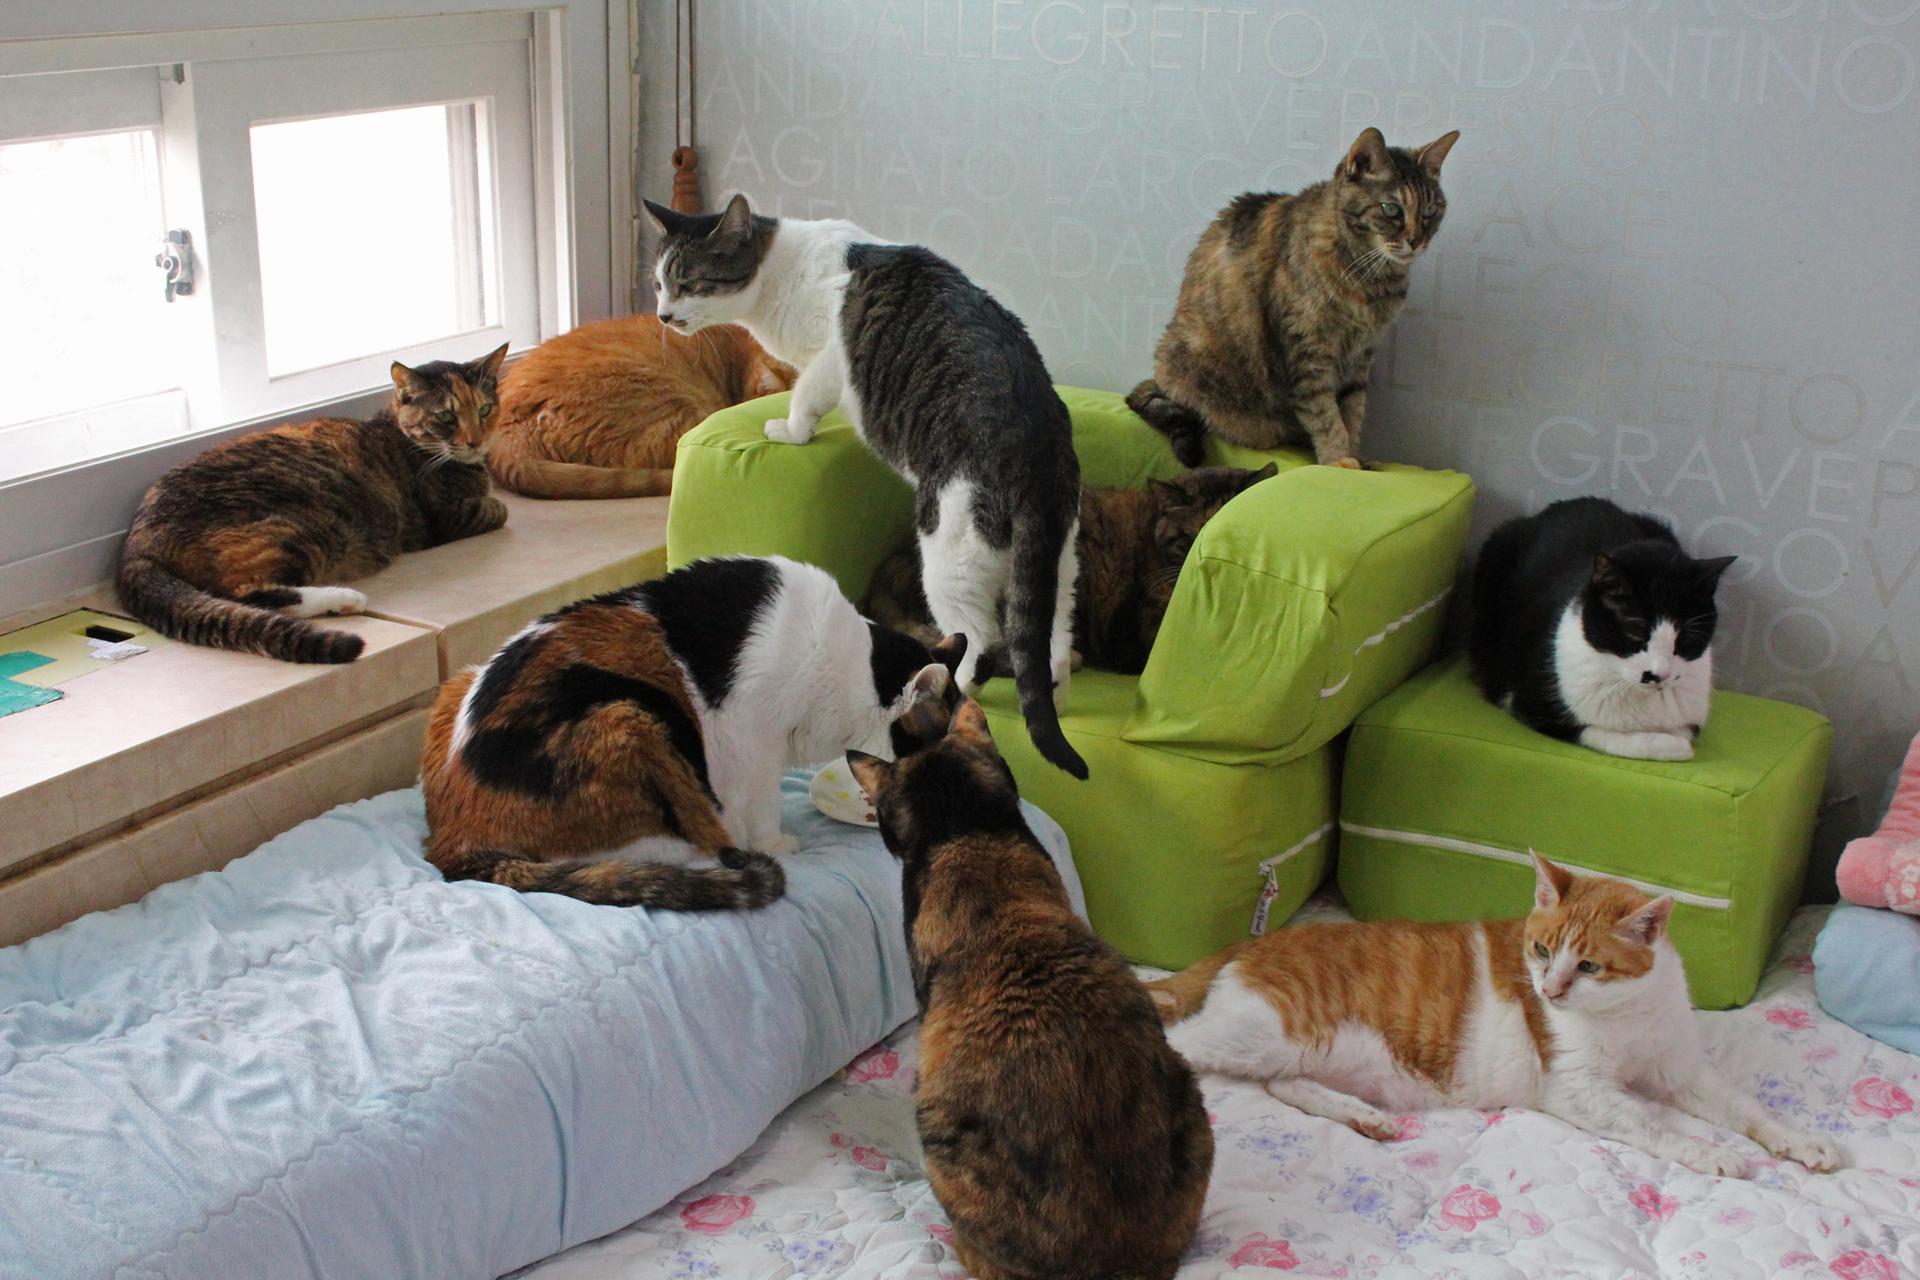 several cats lounge on green chairs in an apartment